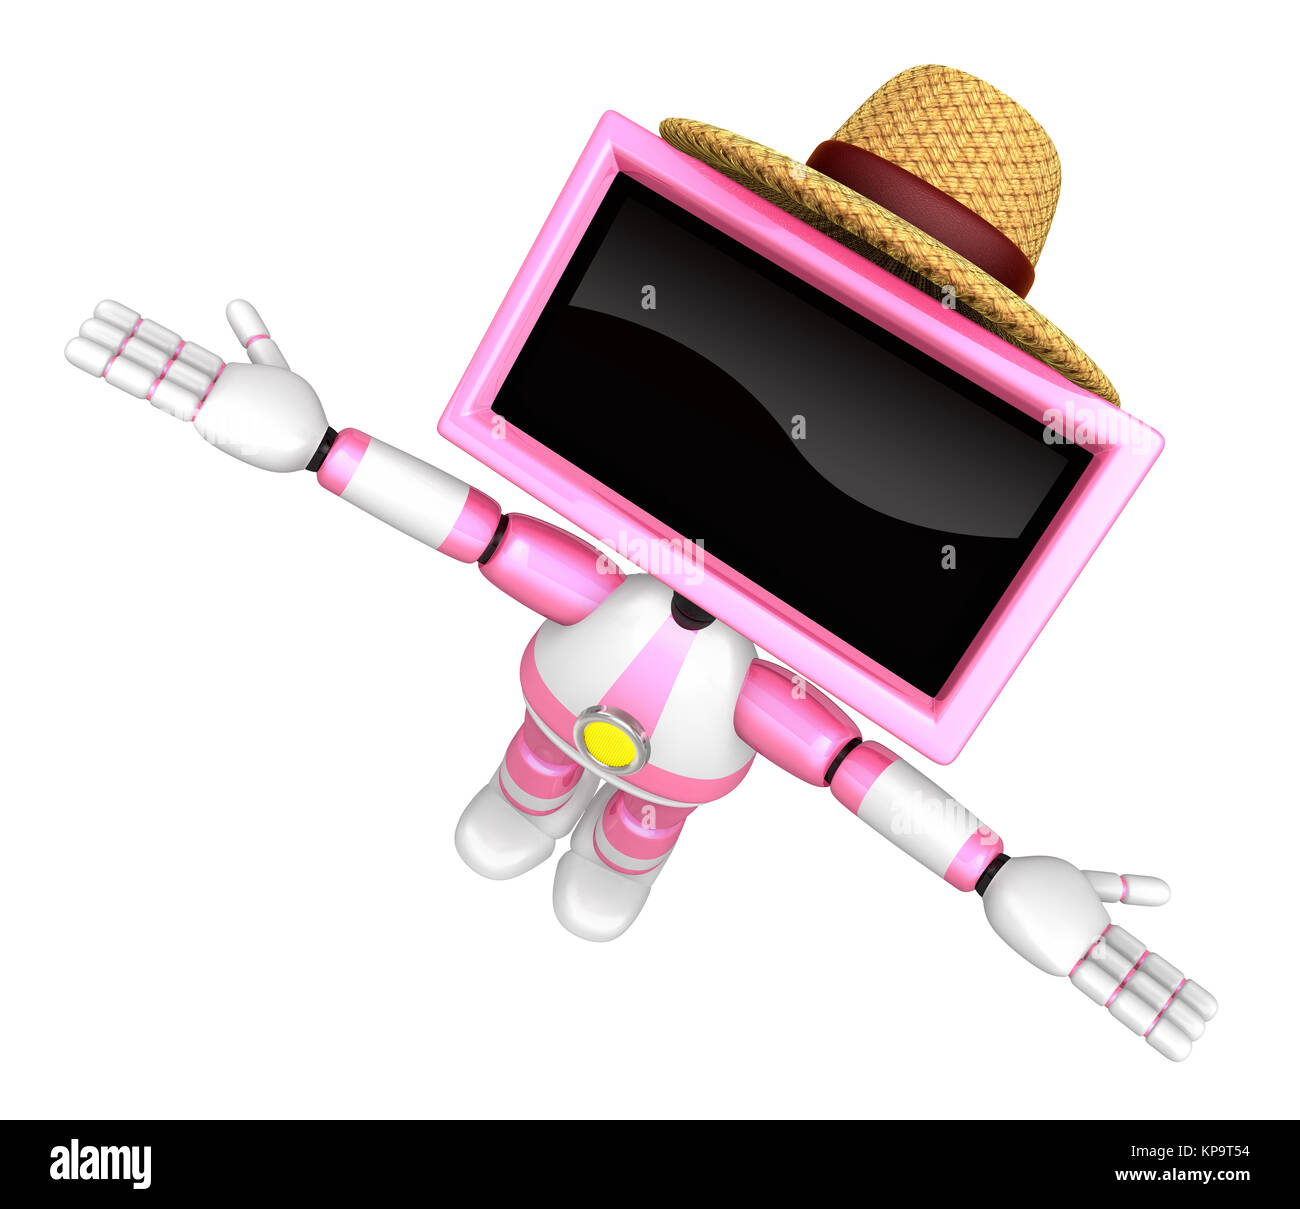 Pink TV robot flying towards the sky. Create 3D Television Robot Series. Stock Photo